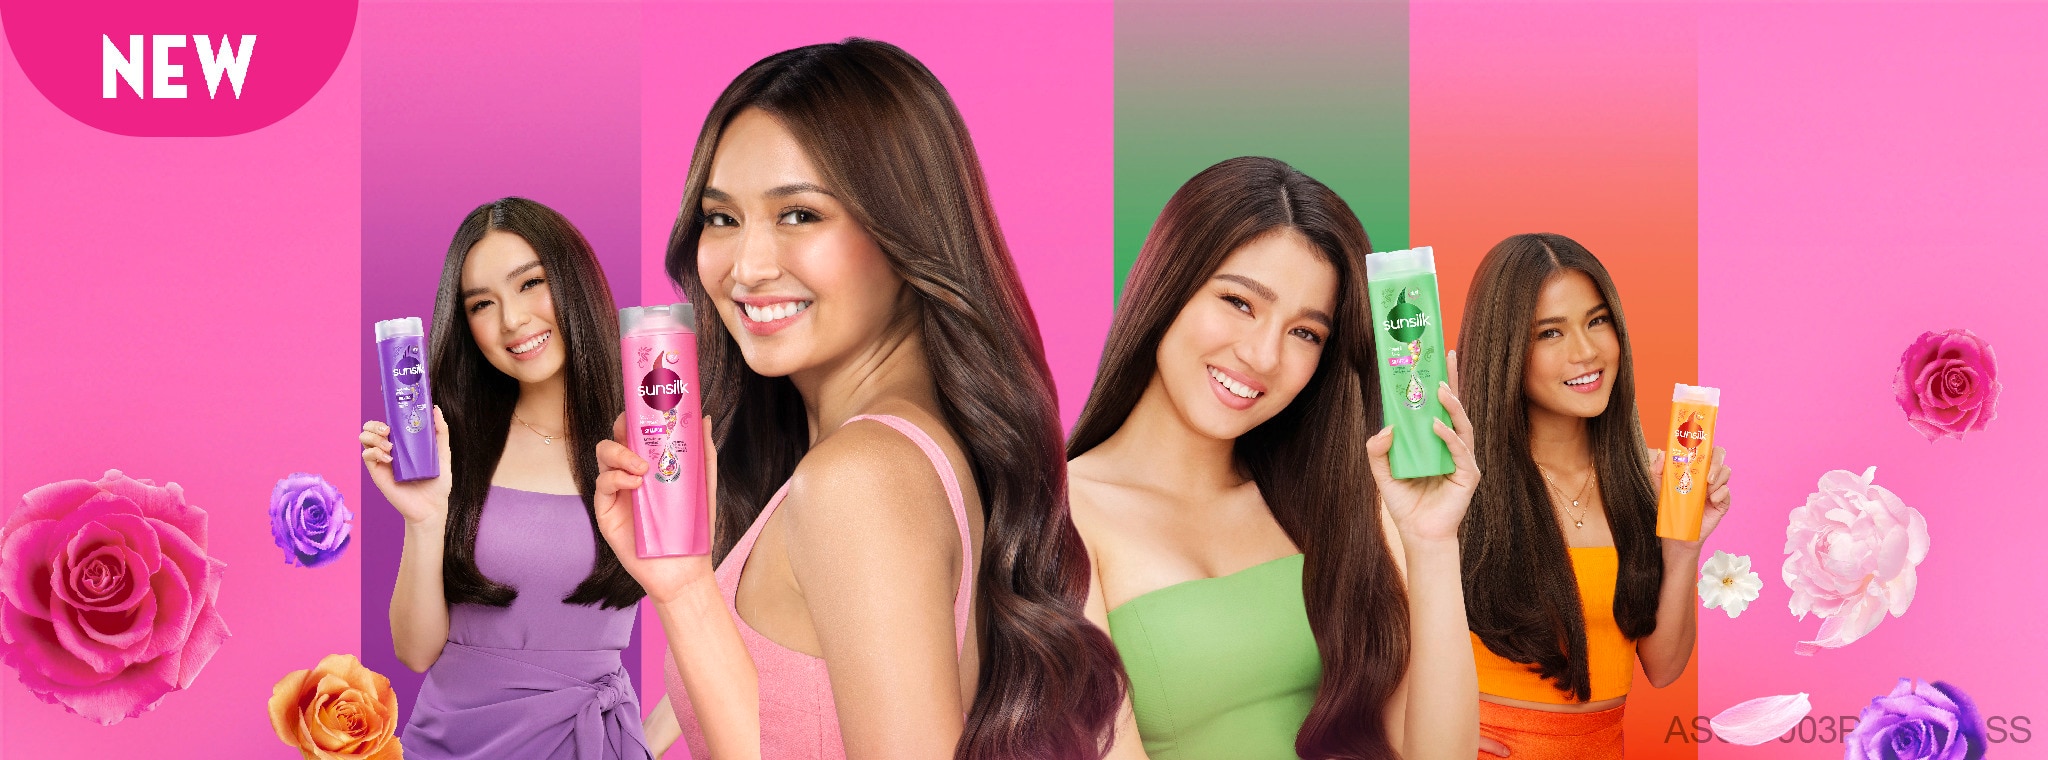 Say goodbye to frizz and frizzy hair with Sunsilk shampoo for beautiful, smooth hair